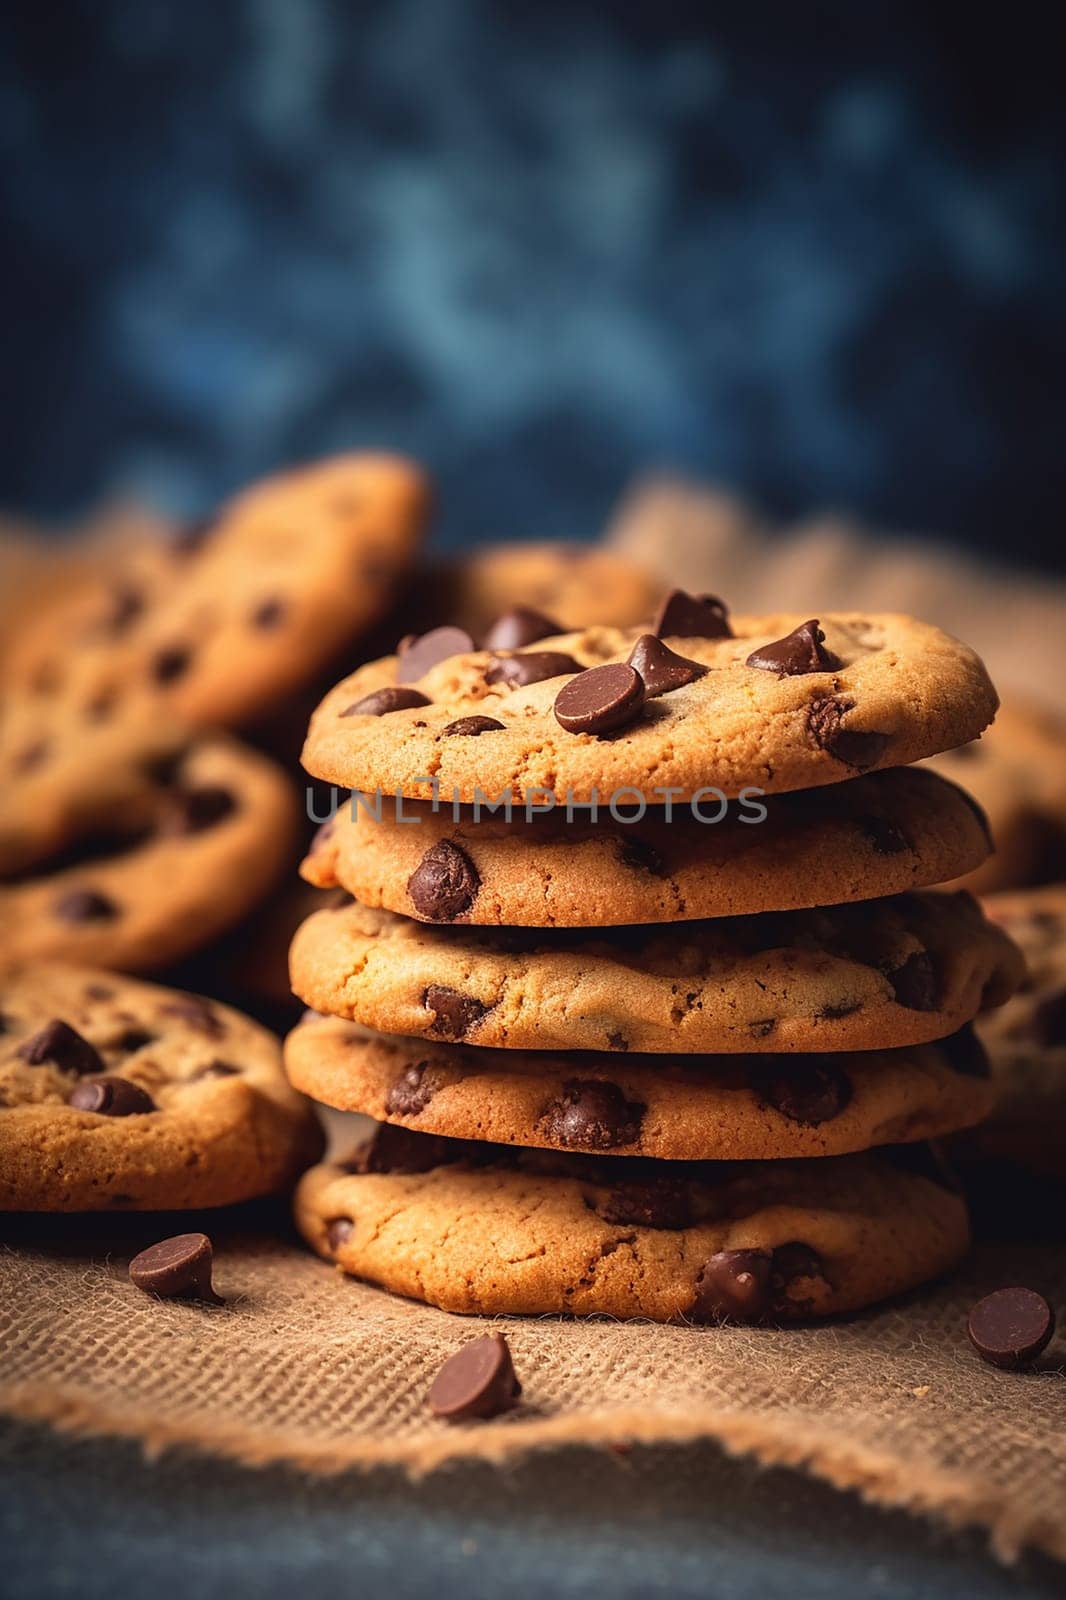 Stack of chocolate chip cookies on cloth with dark backdrop.